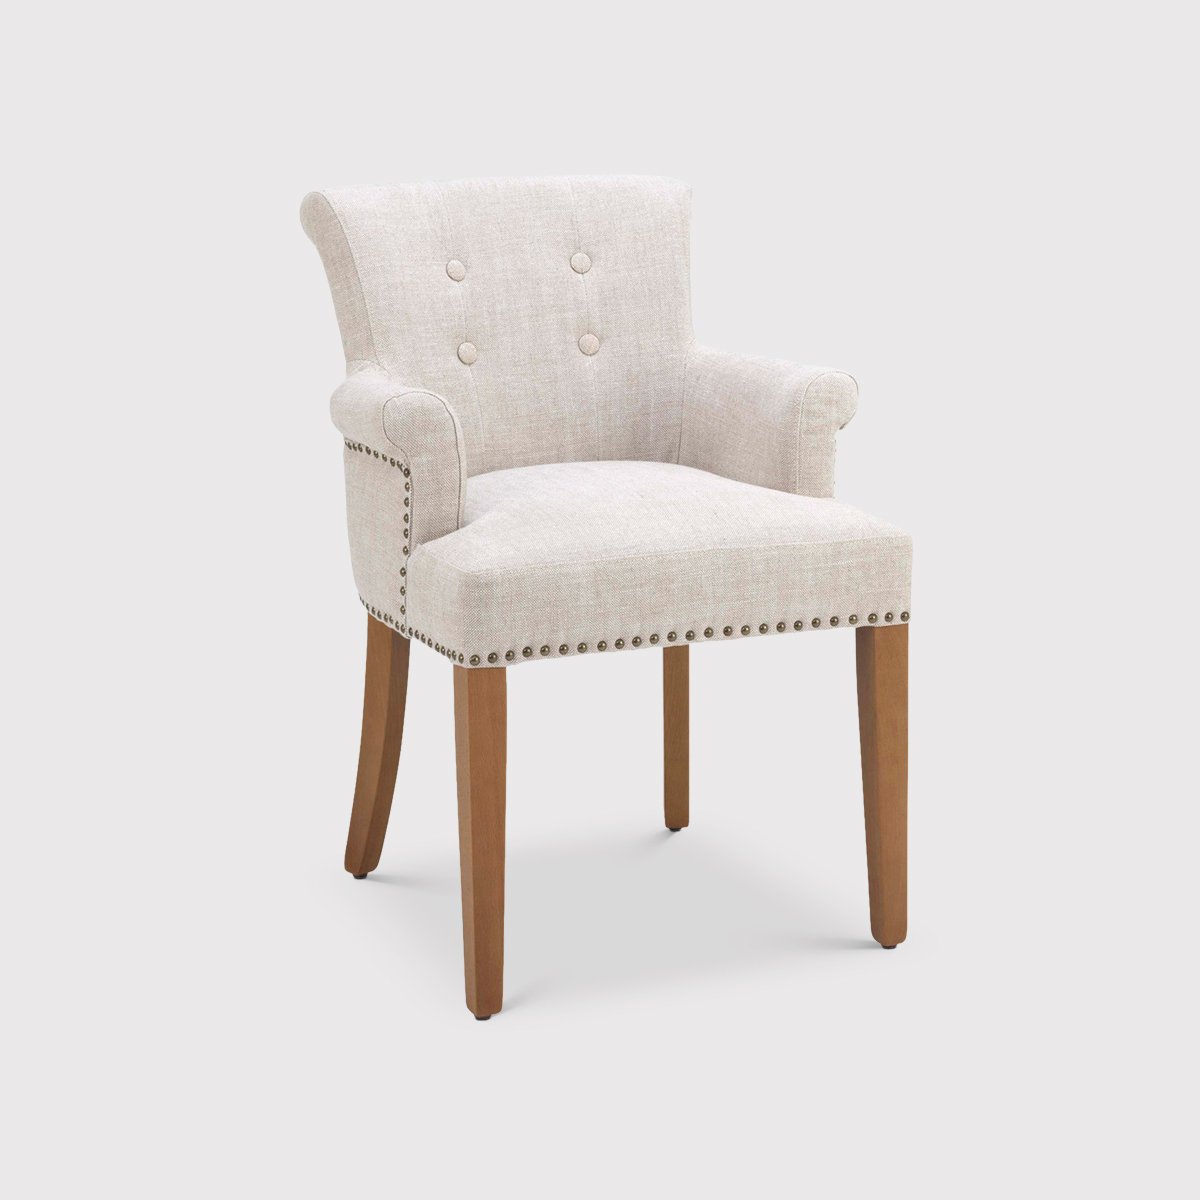 Eichholtz Key Largo Dining Dining Chair With Arms With Arm Off-White Linen Fabric | Barker & Stonehouse